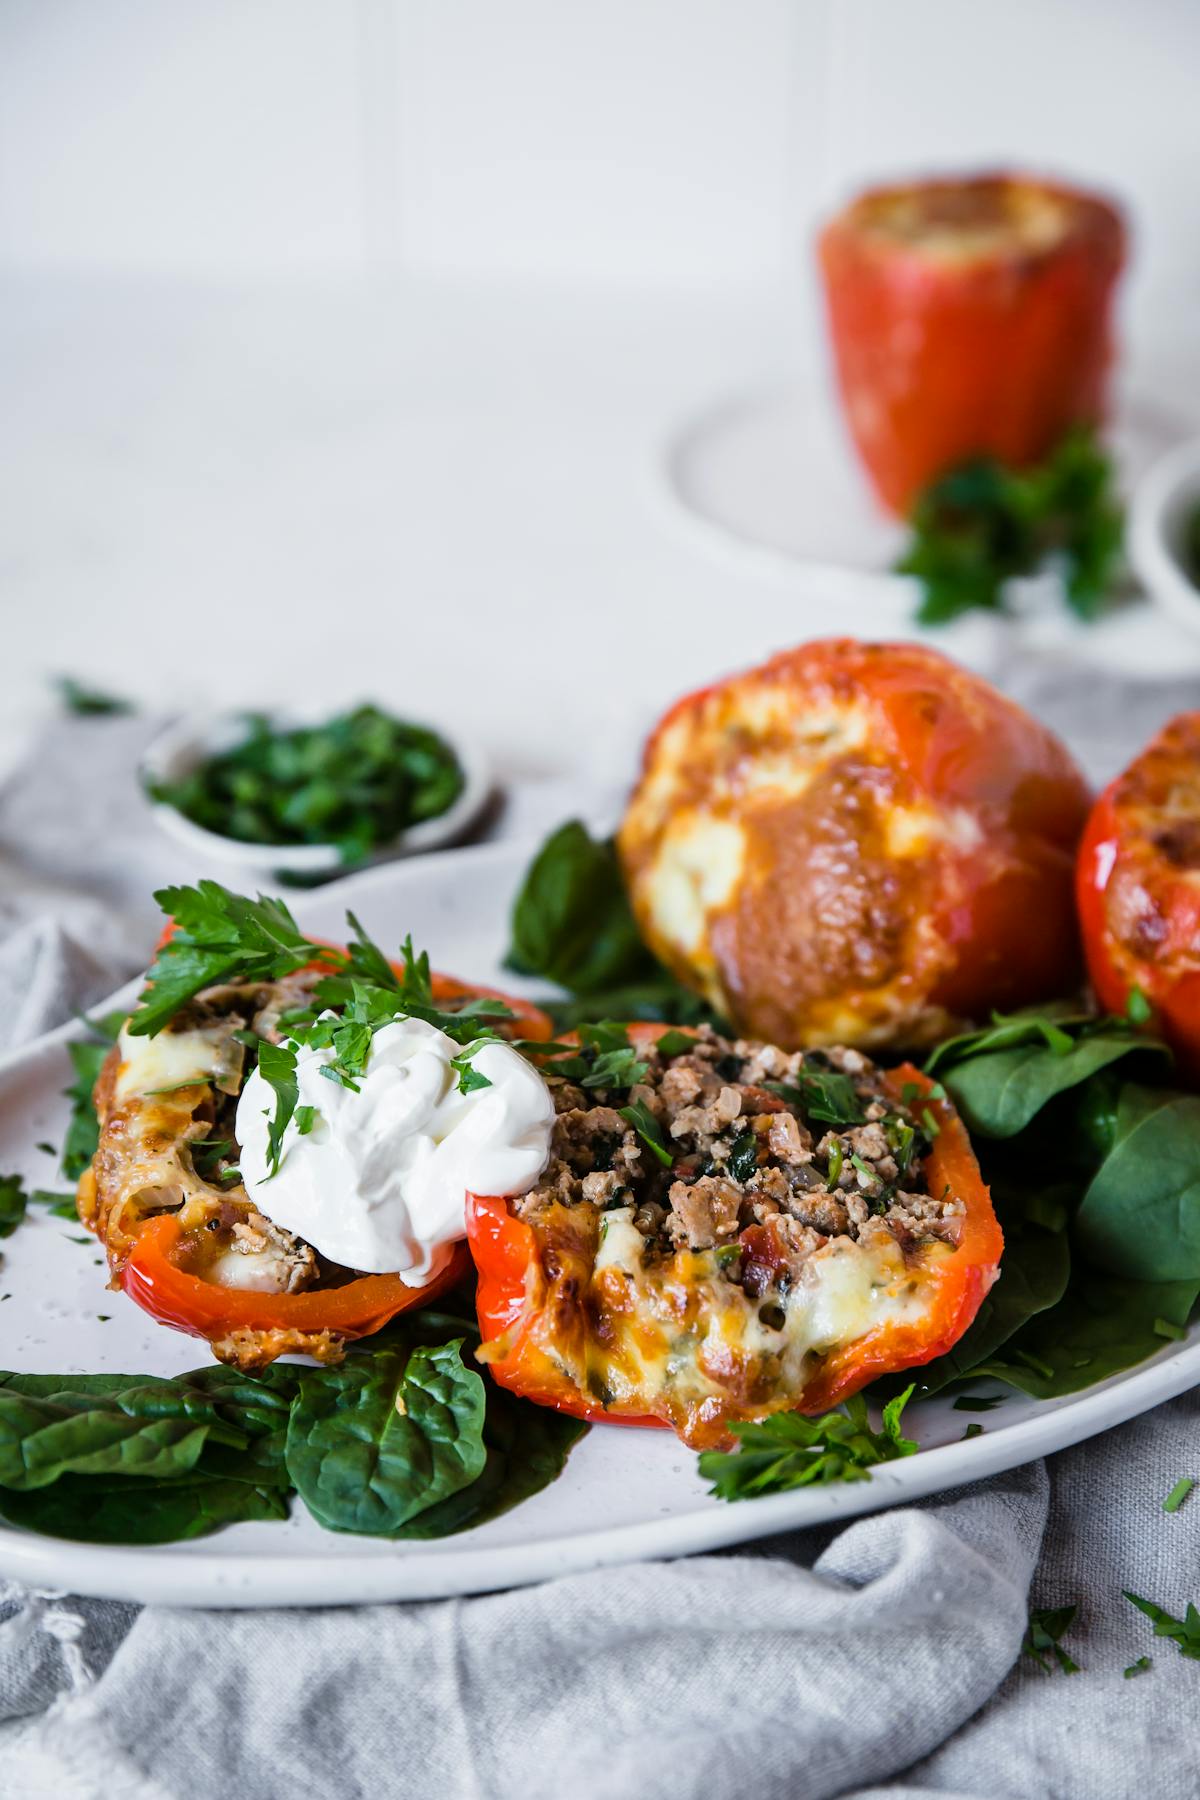 Italian stuffed bell peppers with ground turkey